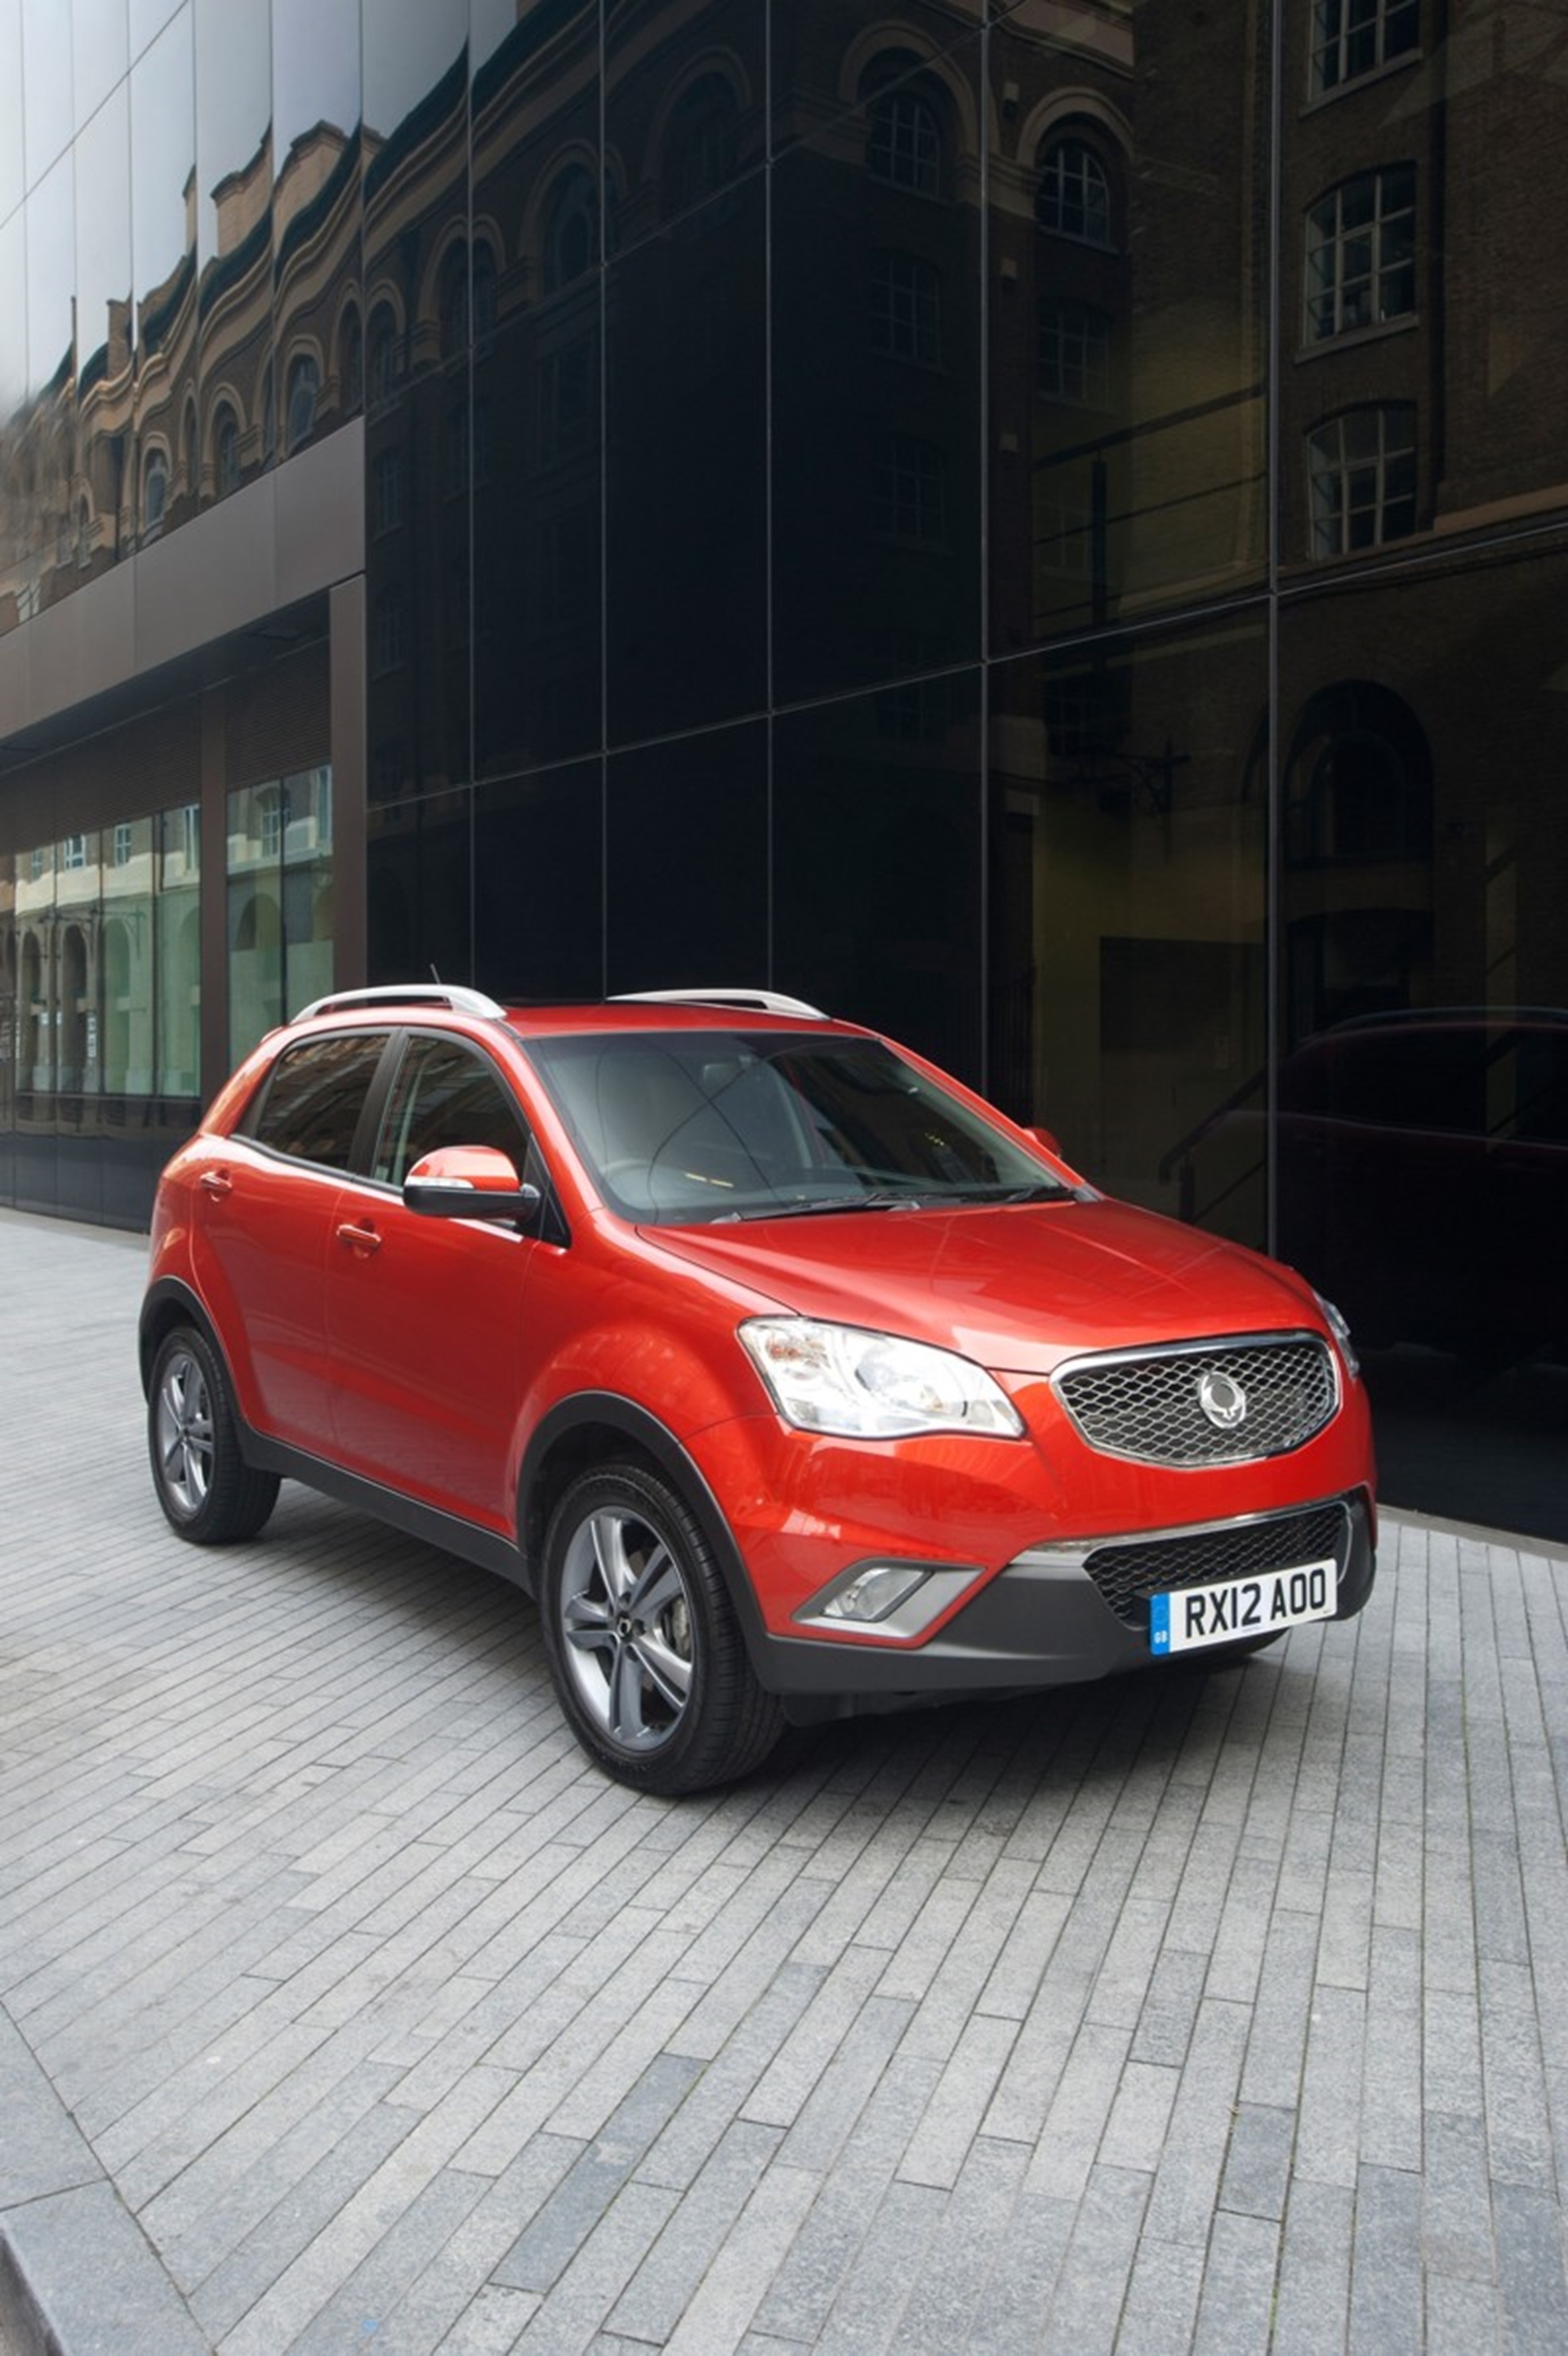 SSANGYONG SPRINGS INTO ‘12’ WITH THE LIMITED EDITION KORANDO LE